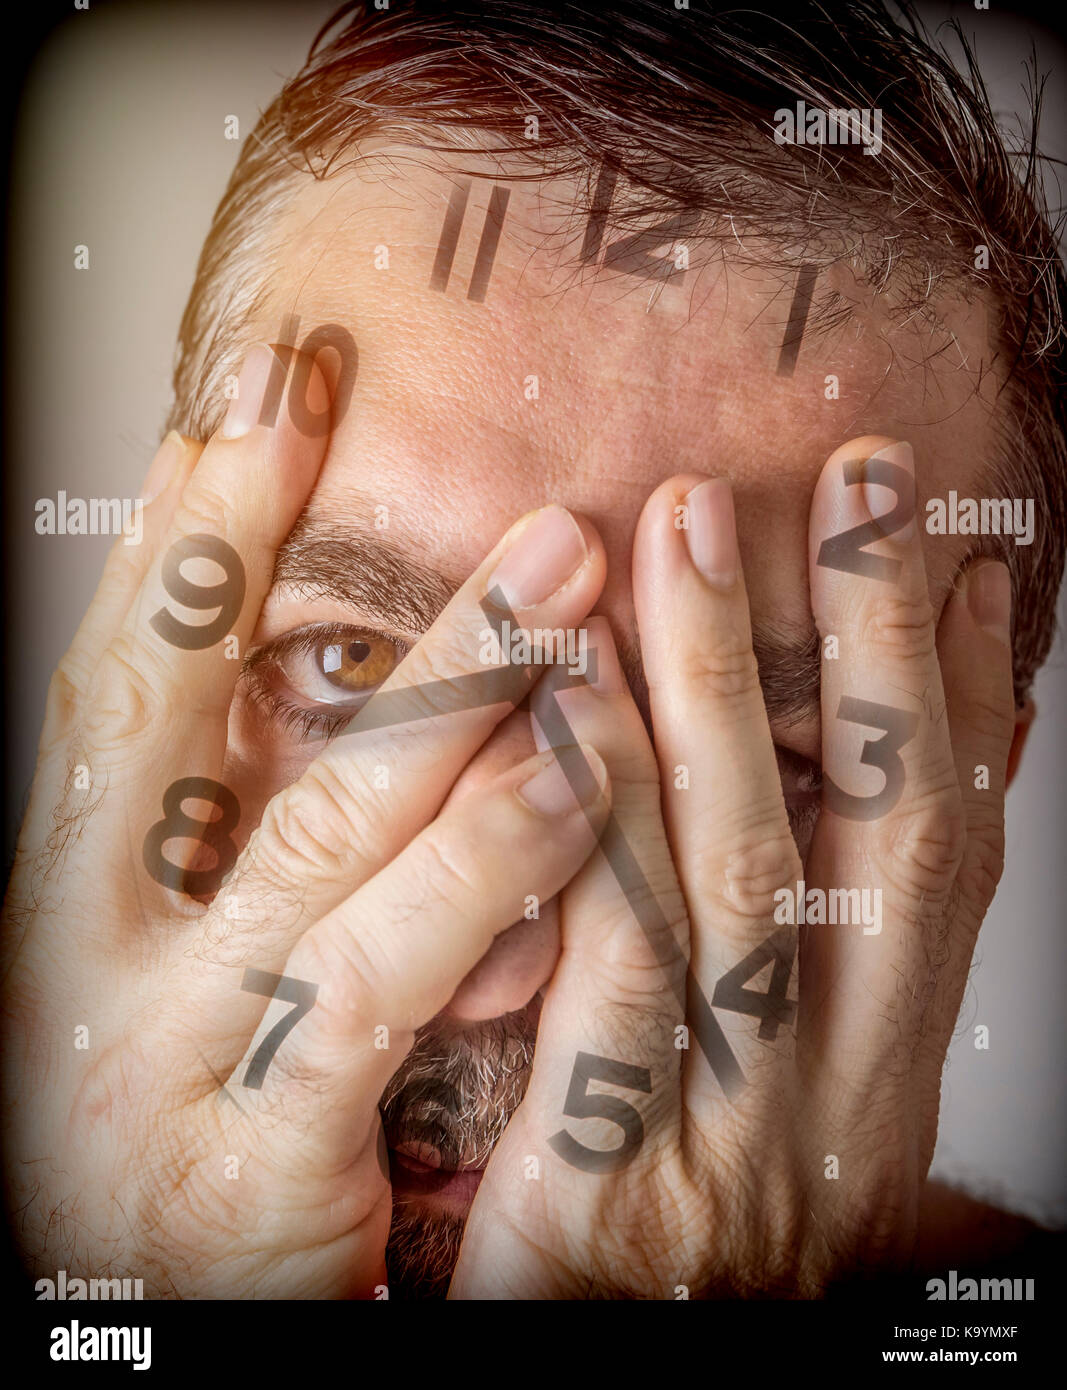 Man with both hands on his face lets see an eye, digital composition Stock Photo